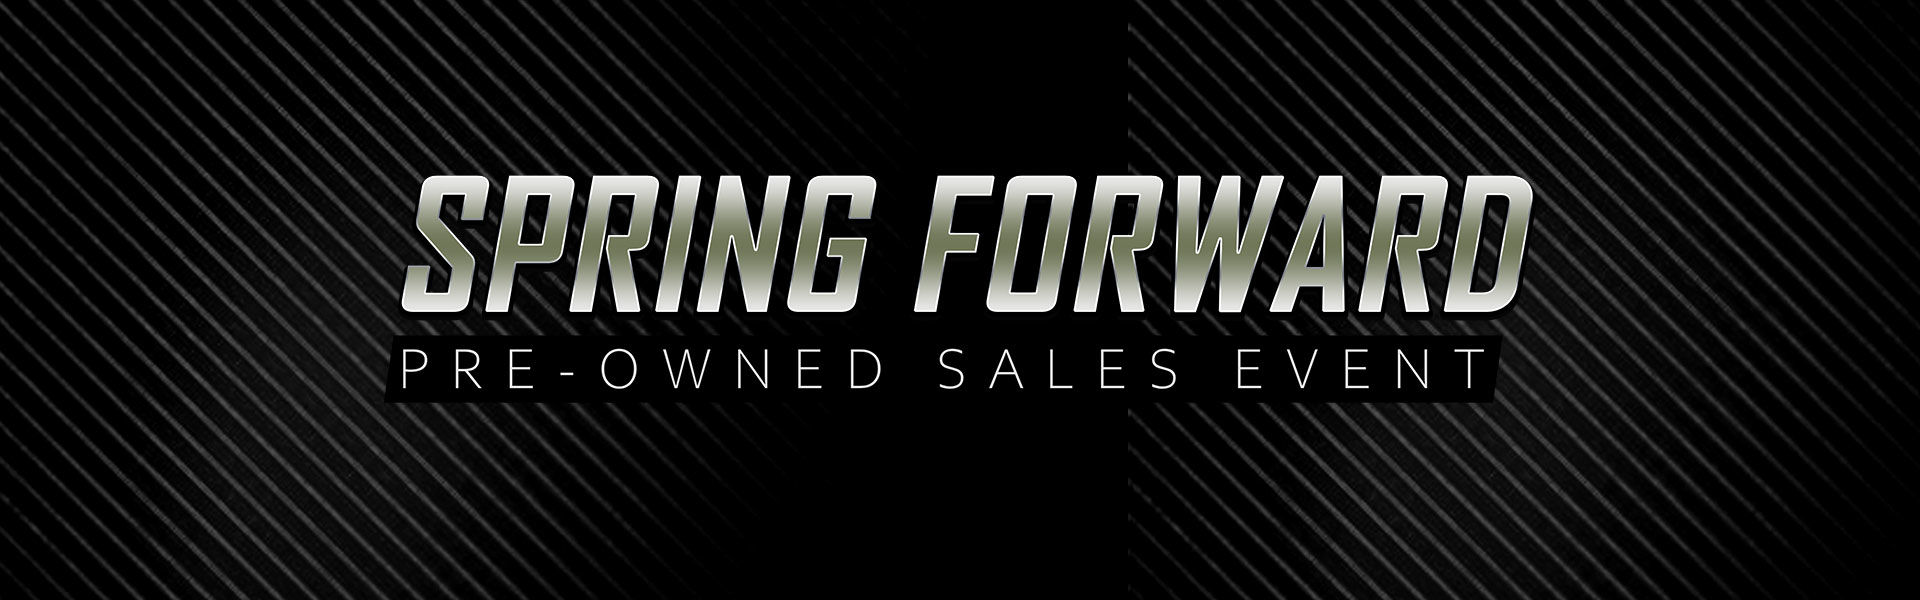 Spring Forward Pre-owned sales event